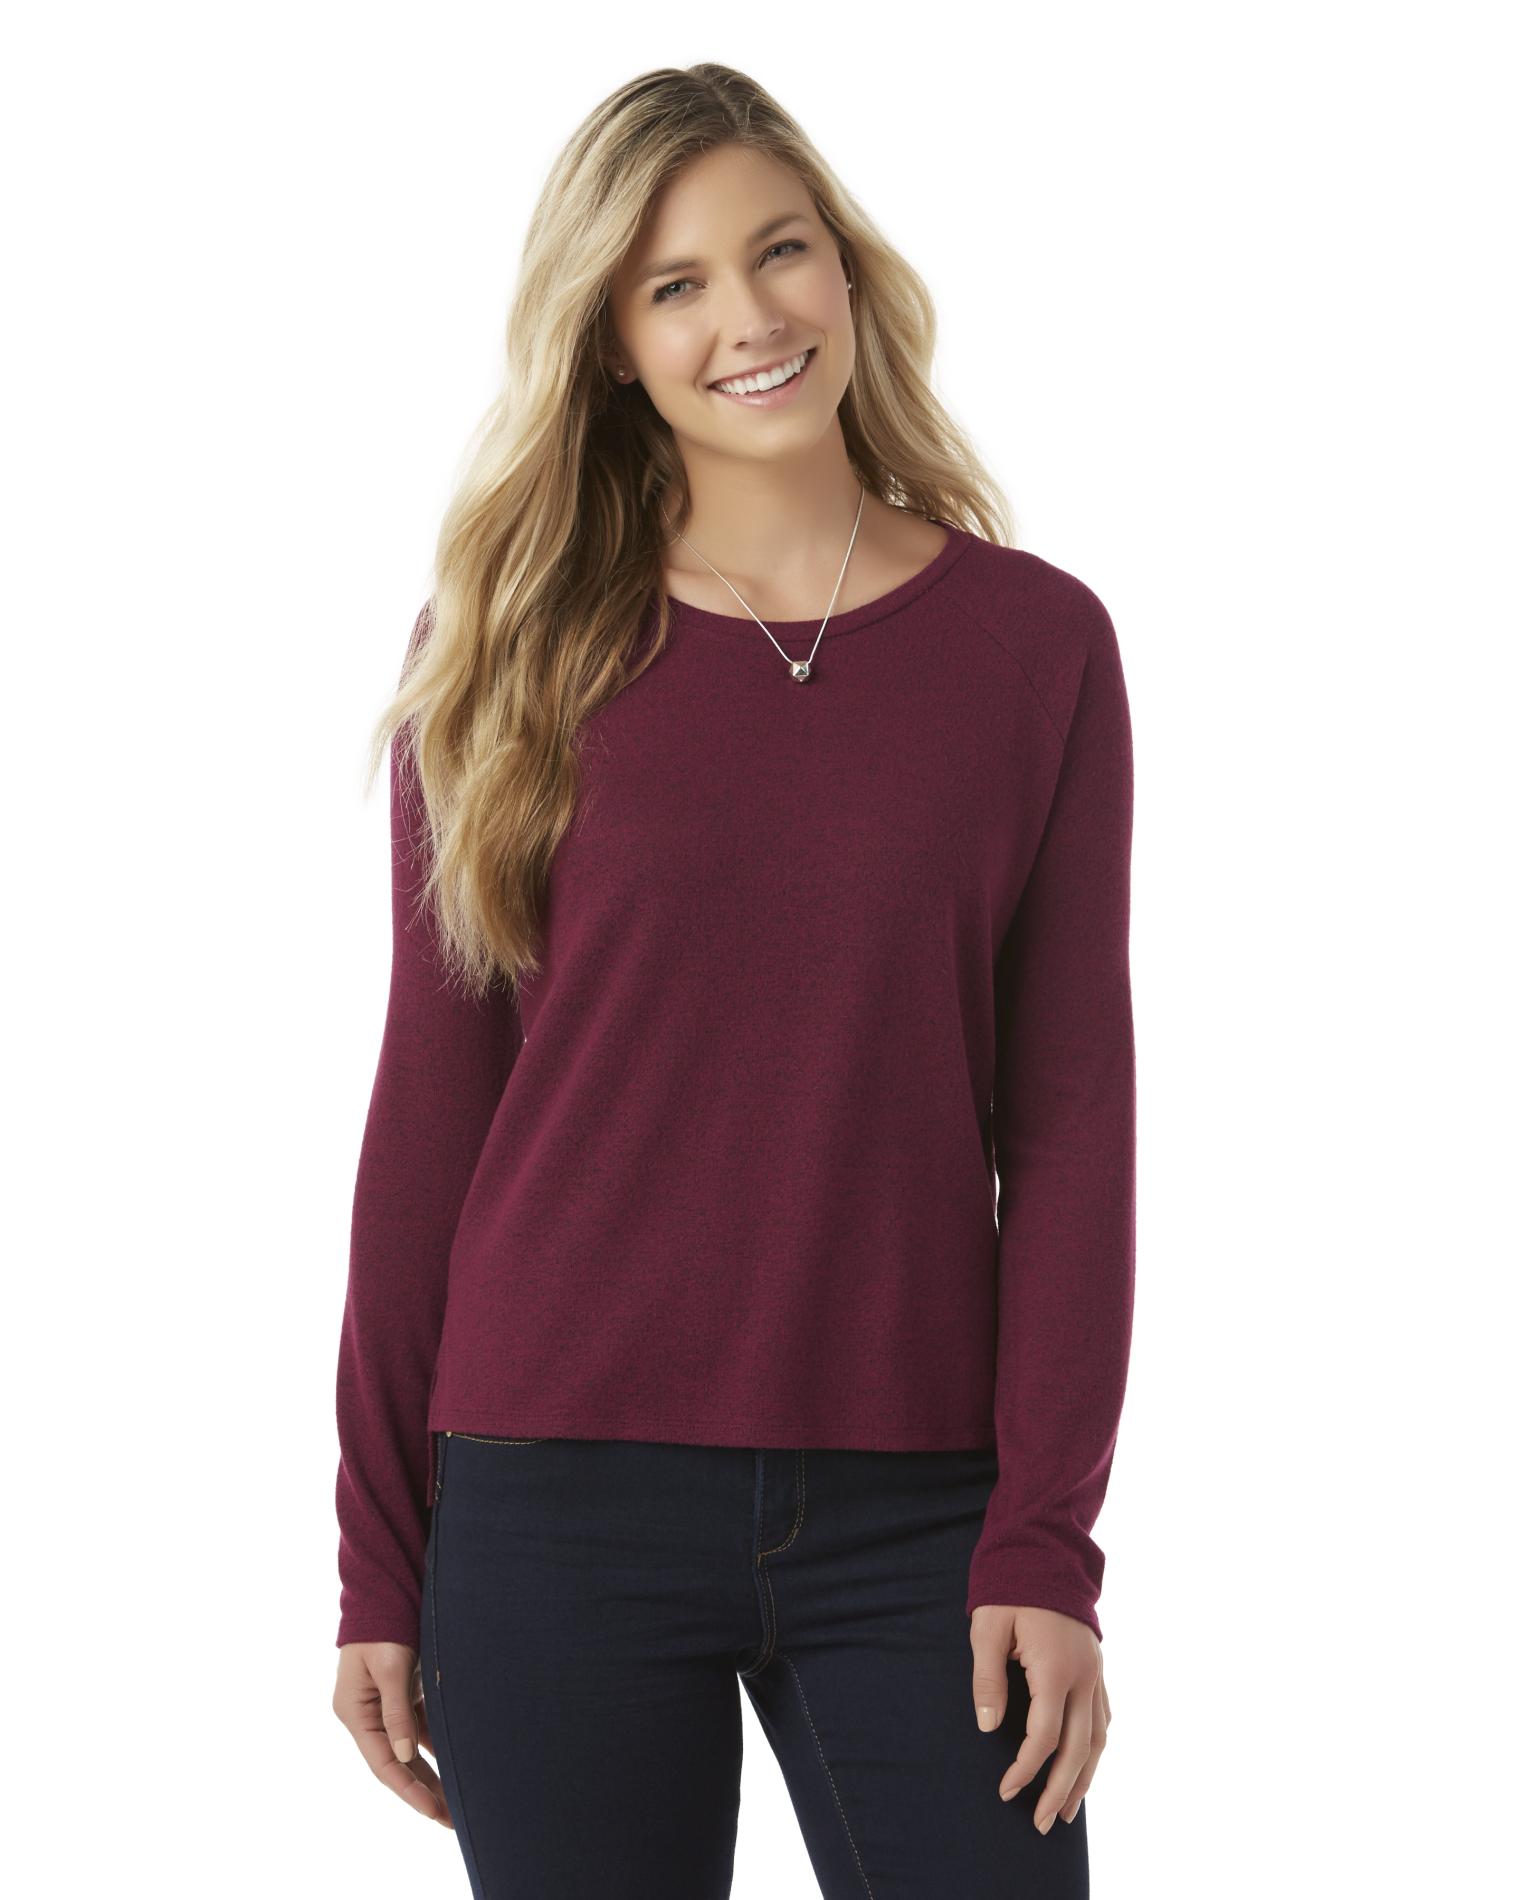 Simply Styled Women's Sweater